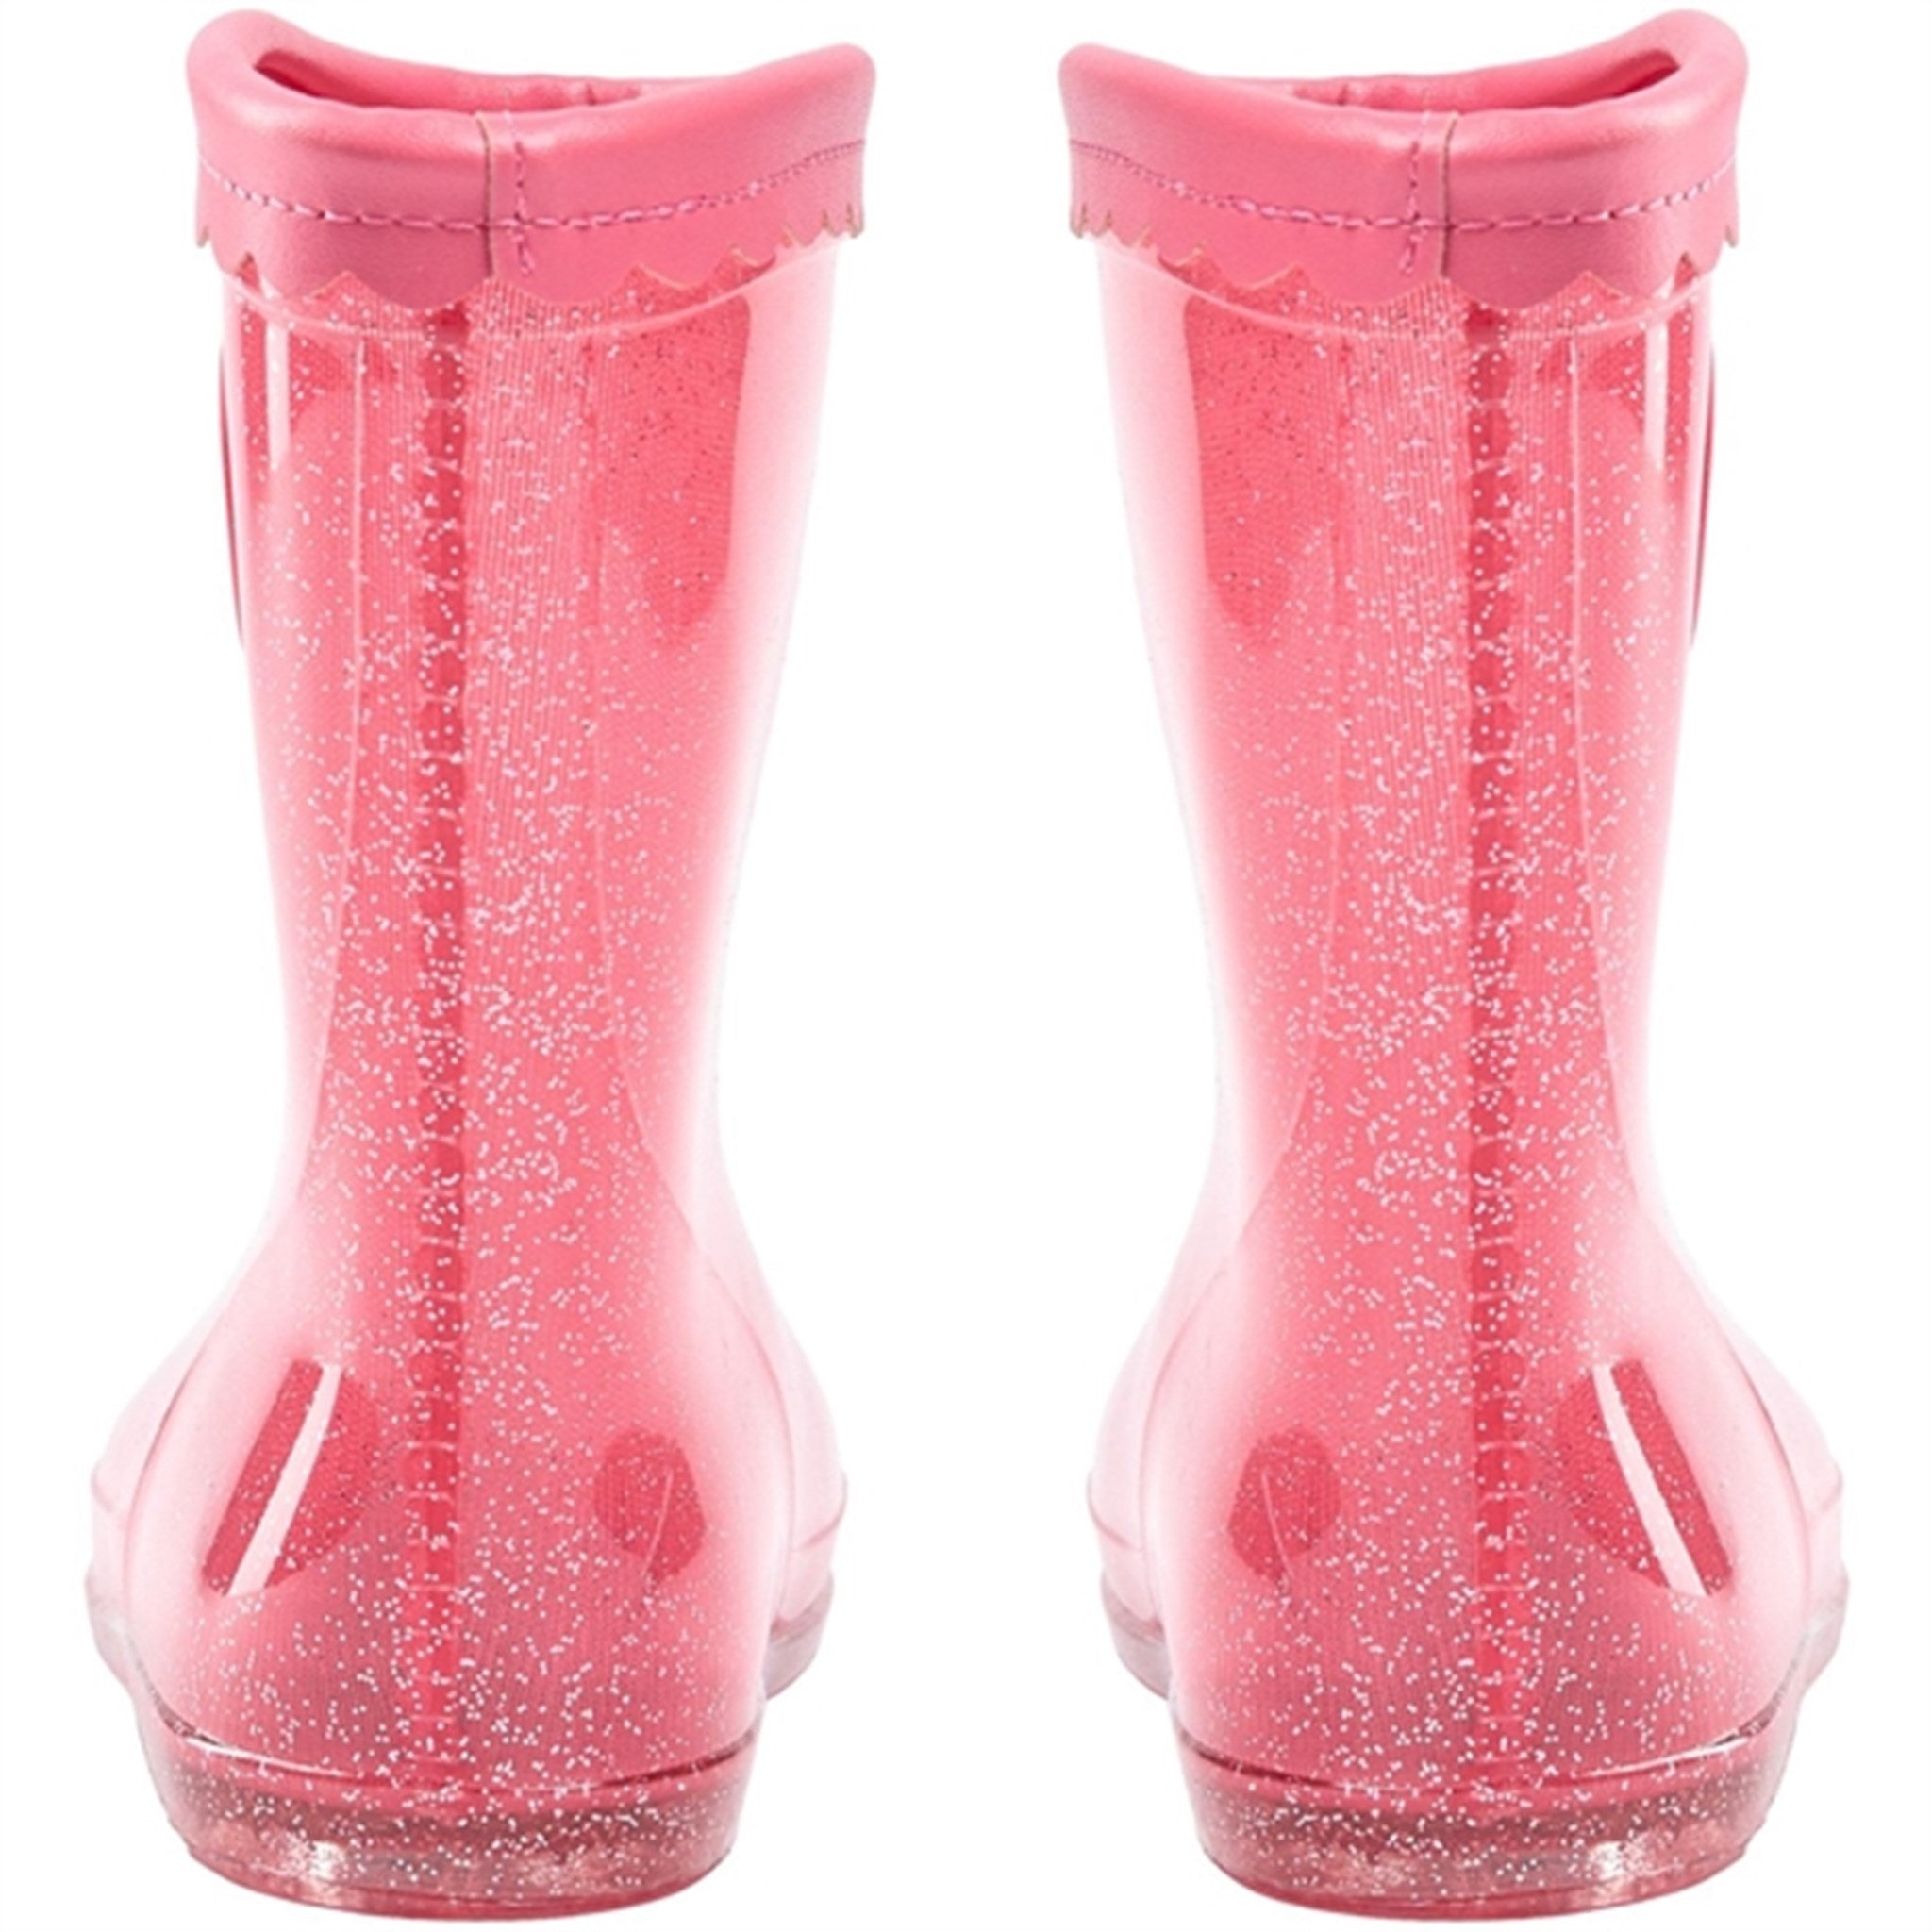 Sofie Schnoor Rubber Boots Coral Pink 9